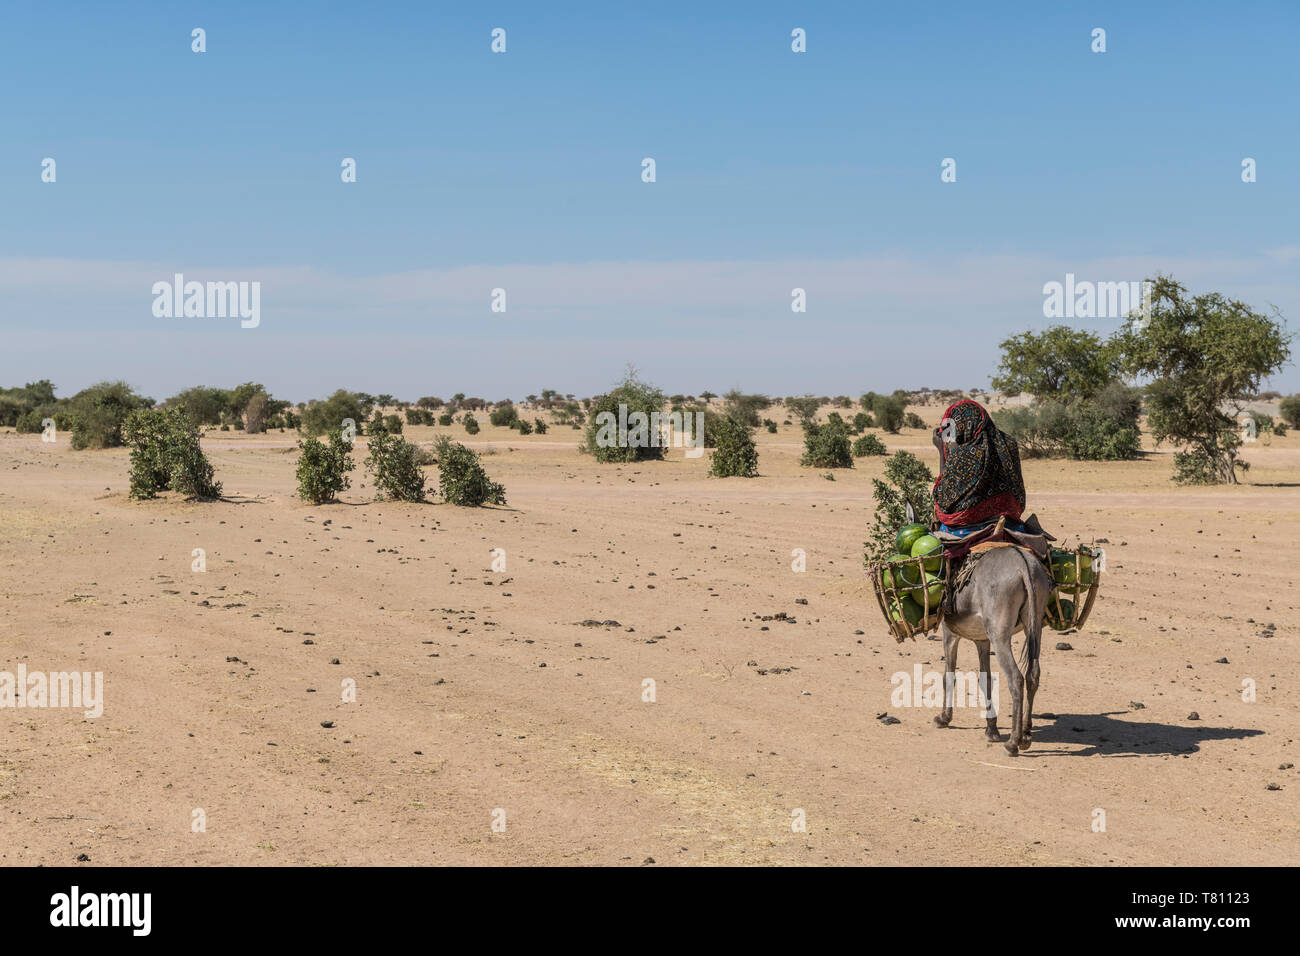 Woman on her donkey, Abeche, Chad, Africa Stock Photo